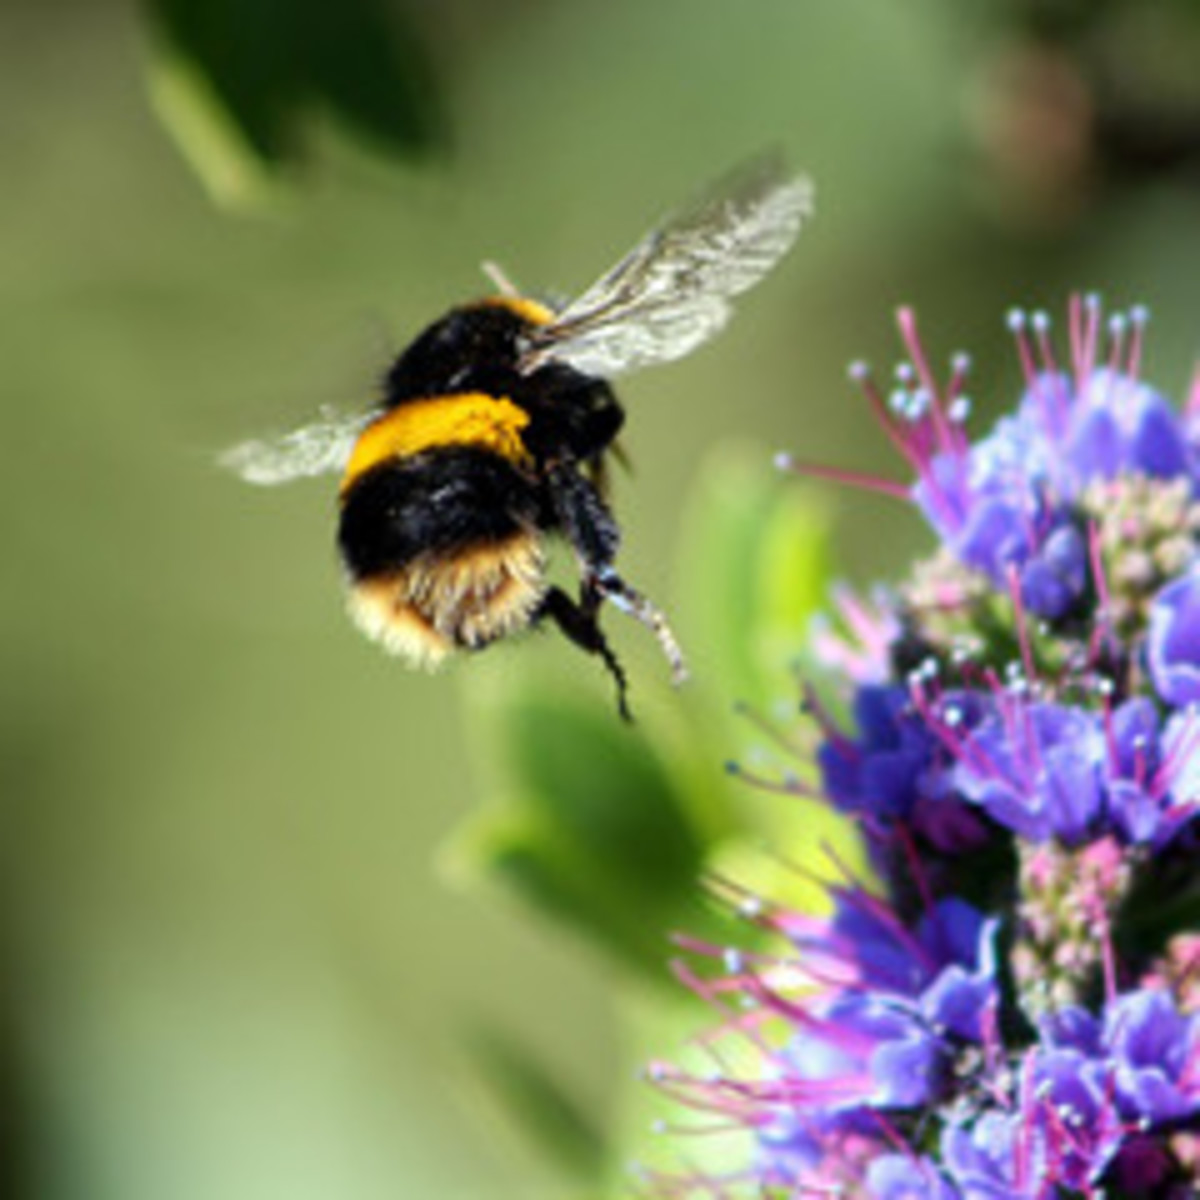 Bumble Bee Alighting on a succulent Scabious Flower......All photos courtesy Flickr.